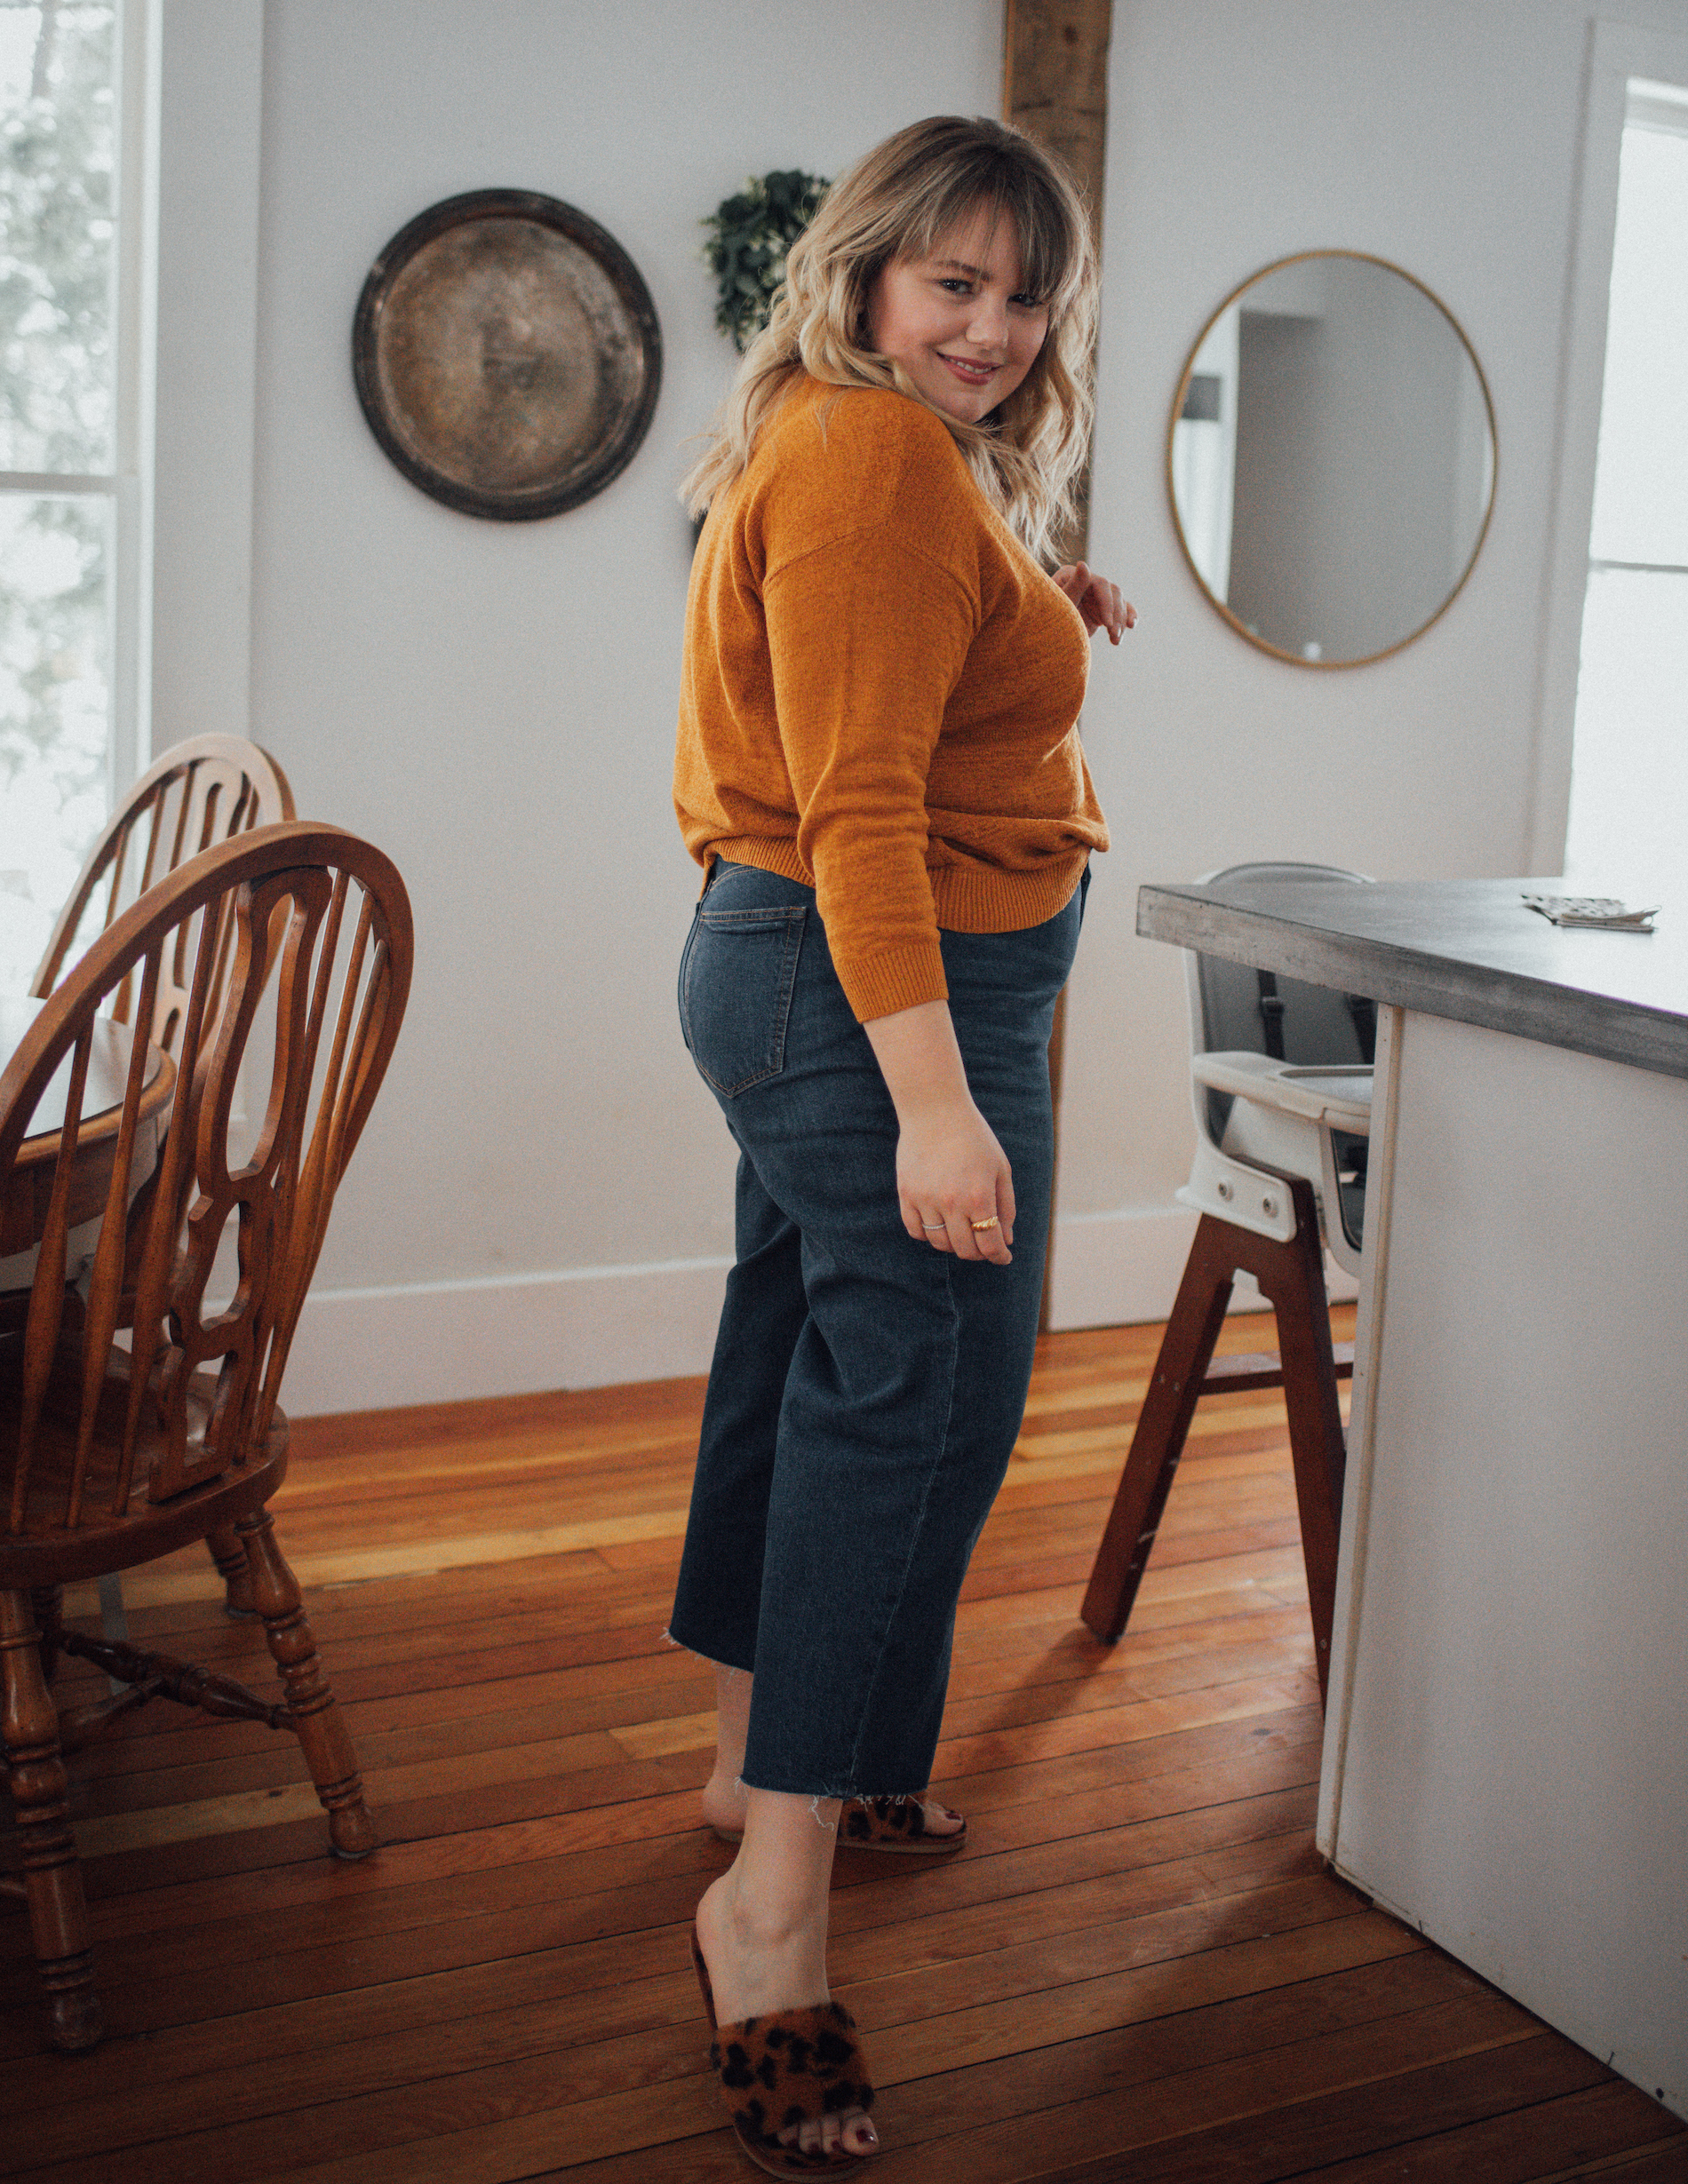 Have you tried Plus Size Denim From Loft? Sharing this wide leg cropped denim and spring sweater from the plus section at LOFT!